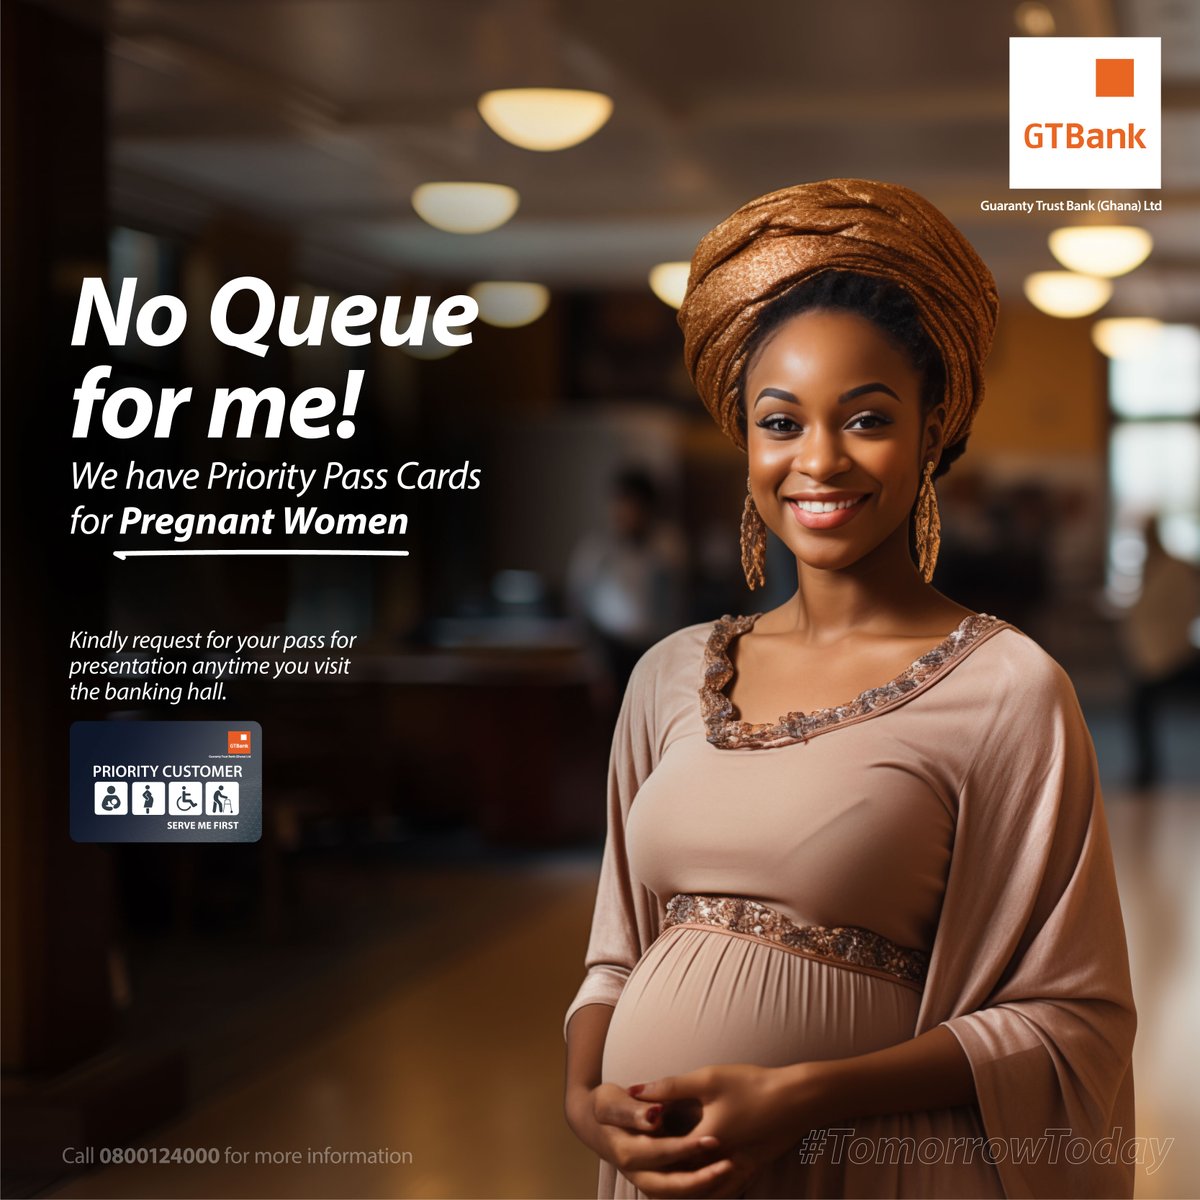 If you’re a pregnant woman, physically challenged, a senior citizen, or a nursing mother, don’t worry about queuing to do your banking at our branches.  Request for yours when you enter the banking hall.
#PriorityPass
#GTBankgh
#GreatExperiences